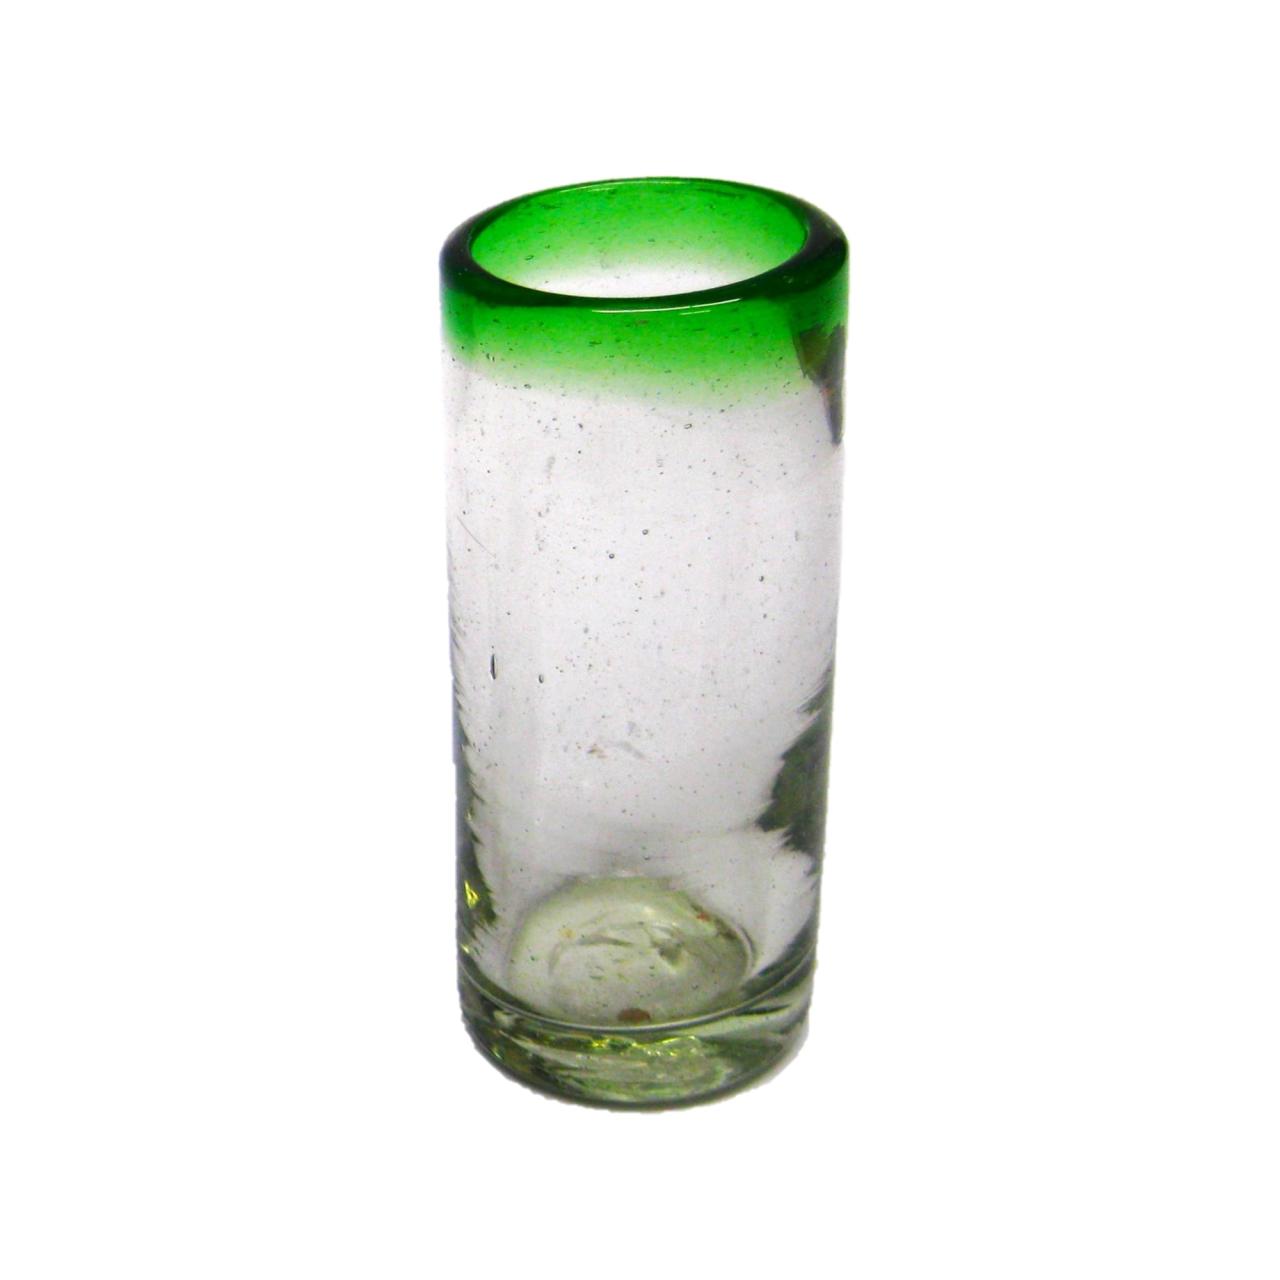 Wholesale Colored Rim Glassware / Emerald Green Rim 2 oz Tequila Shot Glasses  / These shot glasses bordered in emerald green are perfect for sipping your favourite tequila or any other liquor.